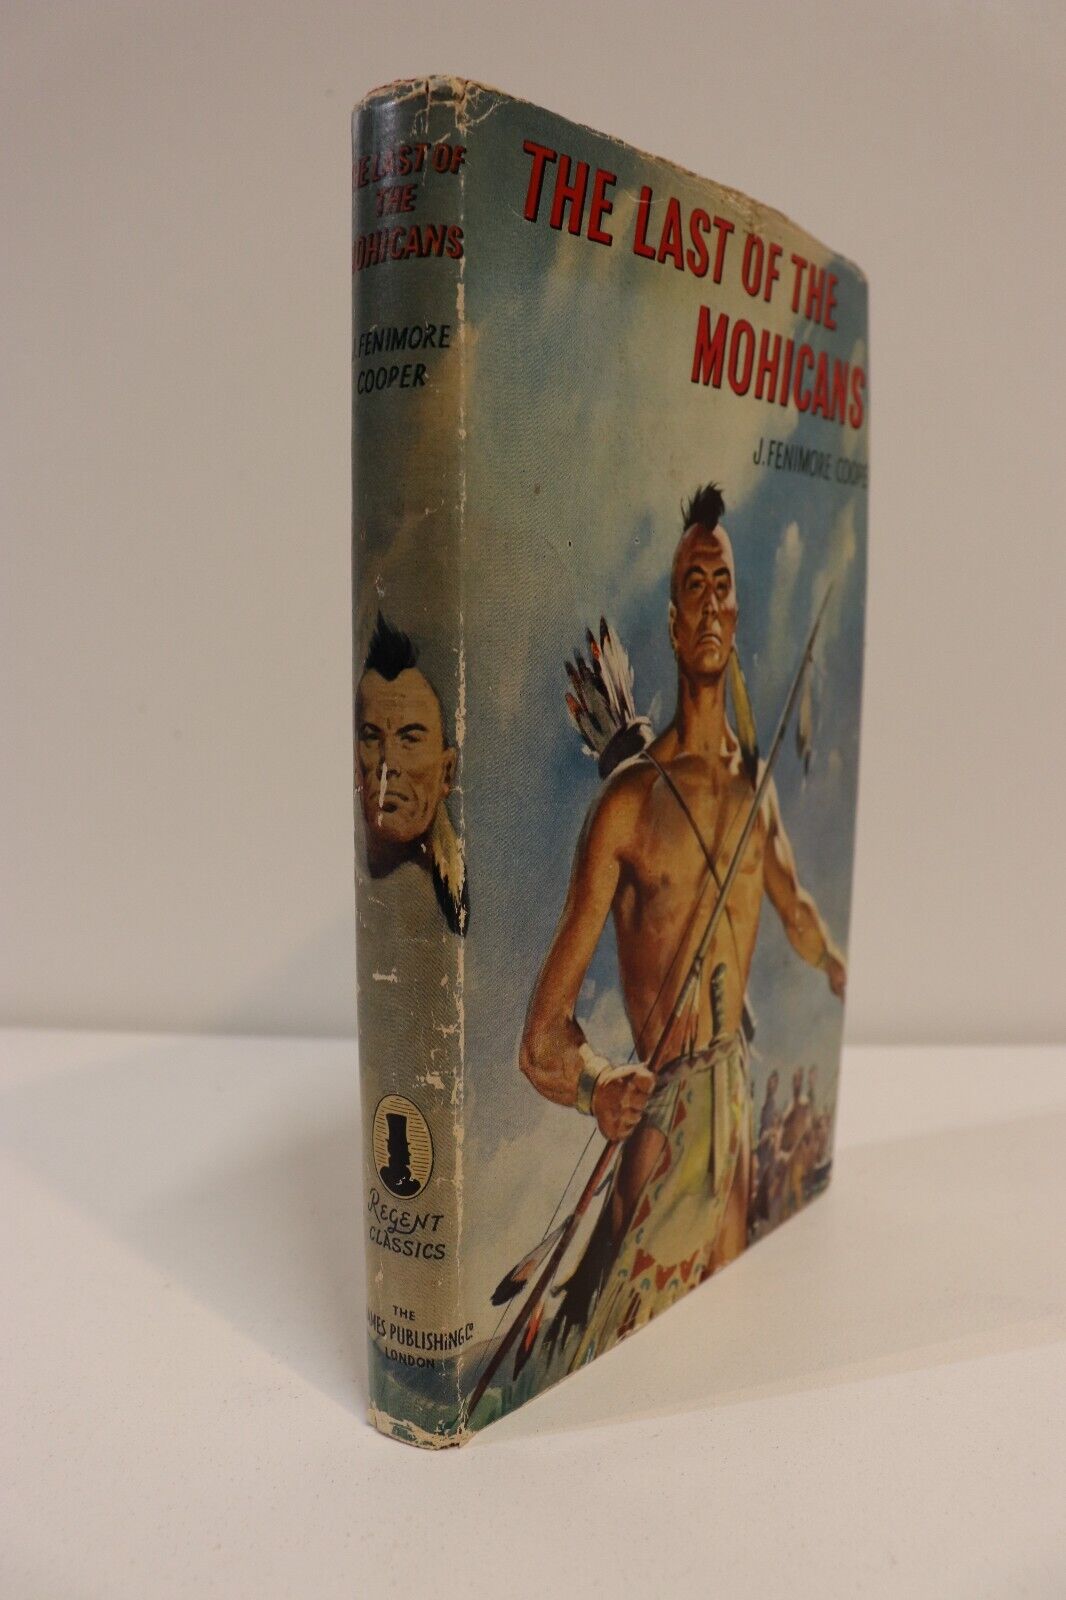 The Last Of The Mohicans - c1960 - Regent Classics Fiction Book